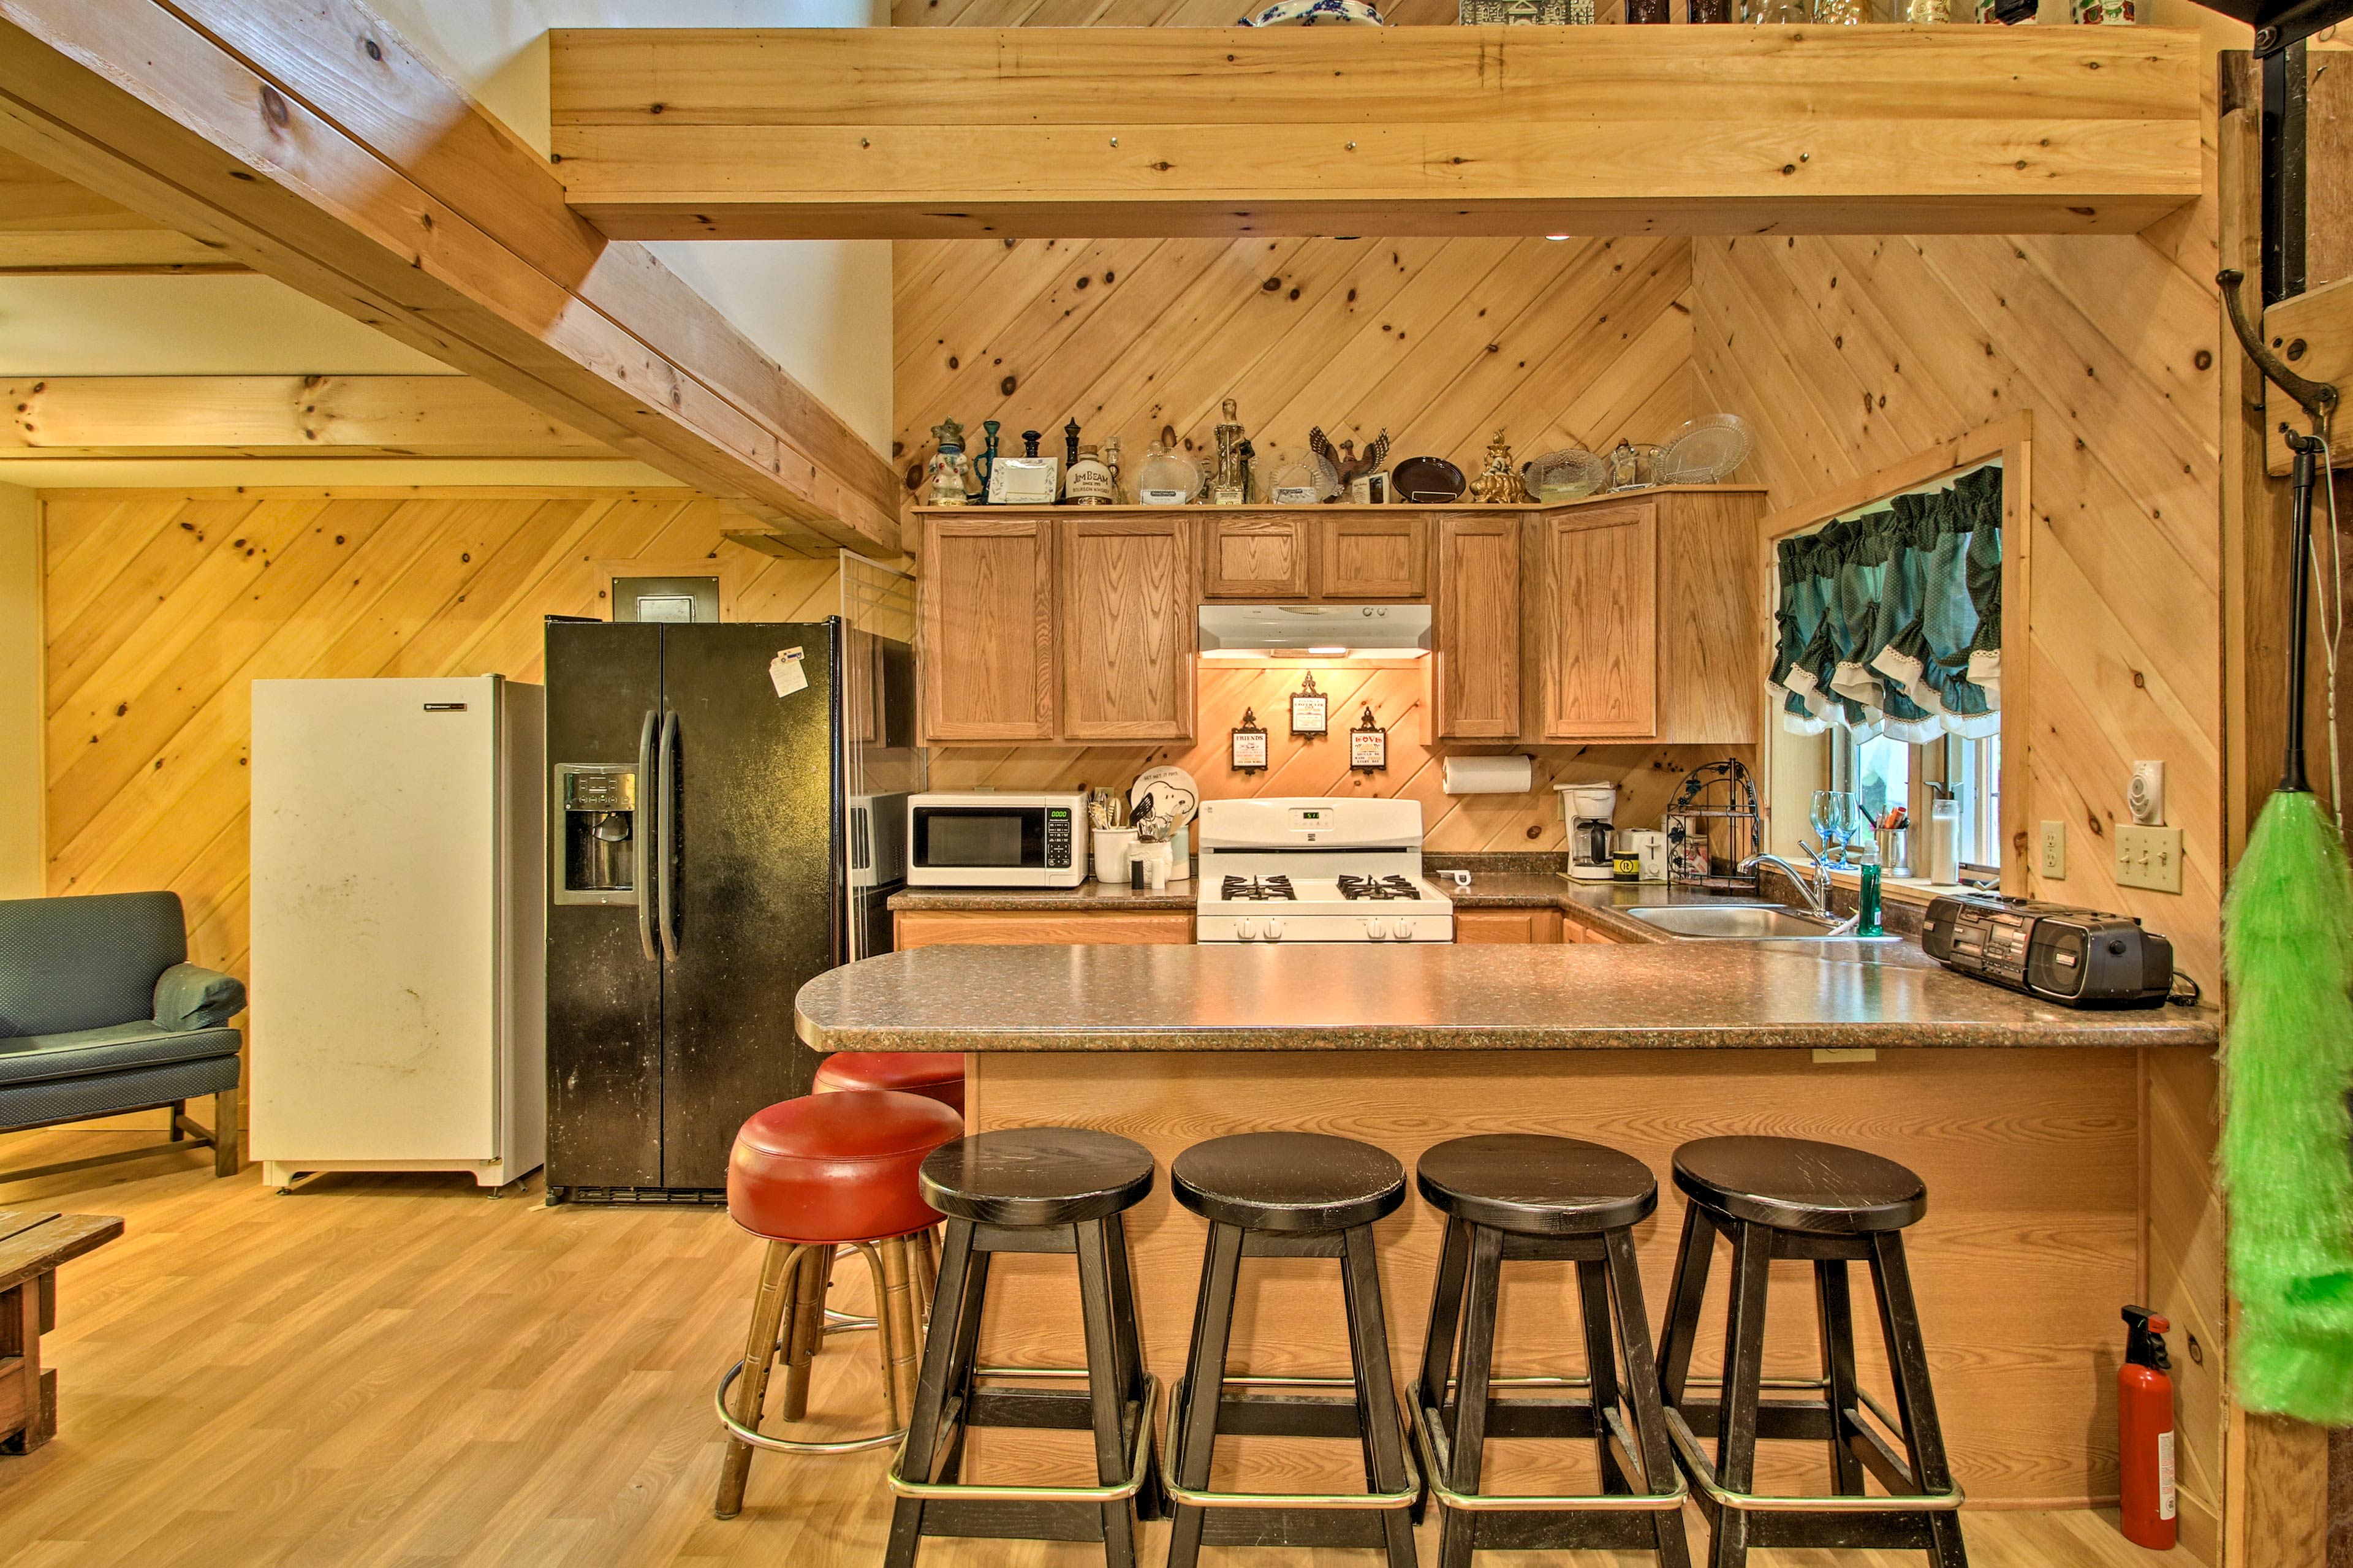 The 3-bedroom, 1-bathroom cabin features a well-equipped kitchen.